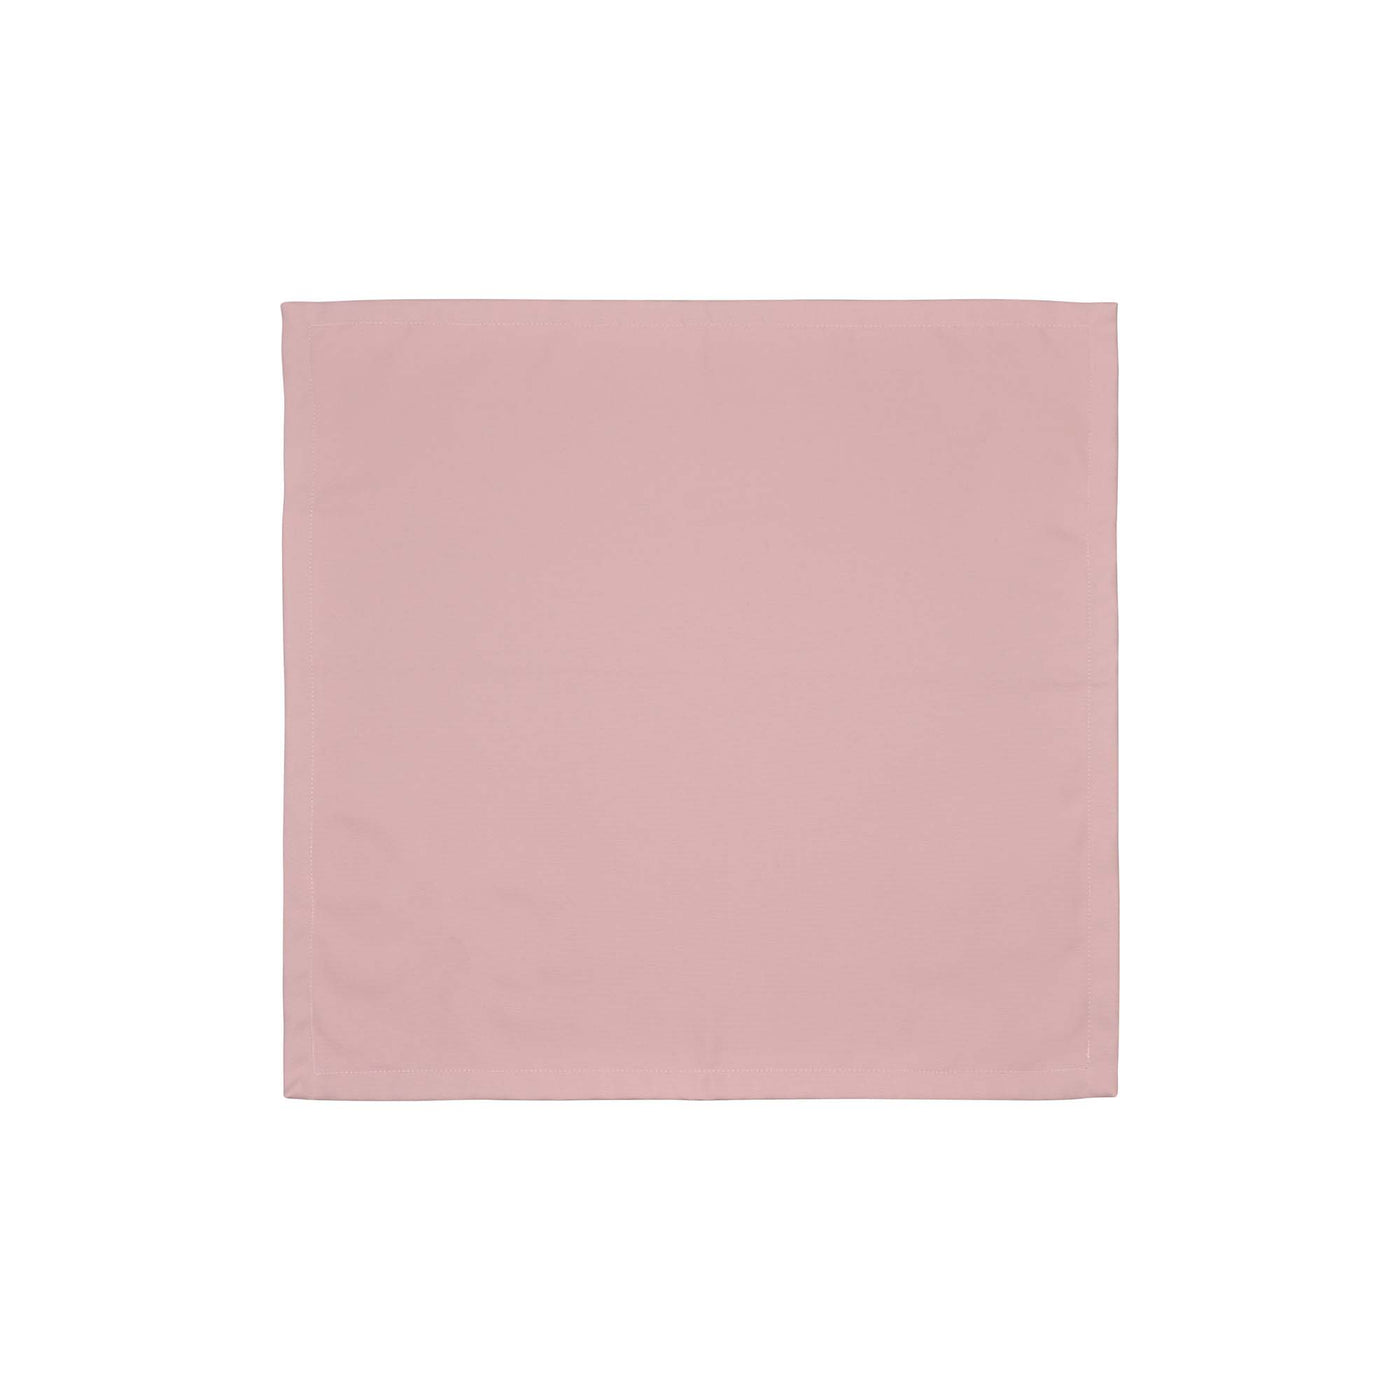 Mikado Napkins & Table Linen Collection - Dusky Pink, Grey, Gold or White